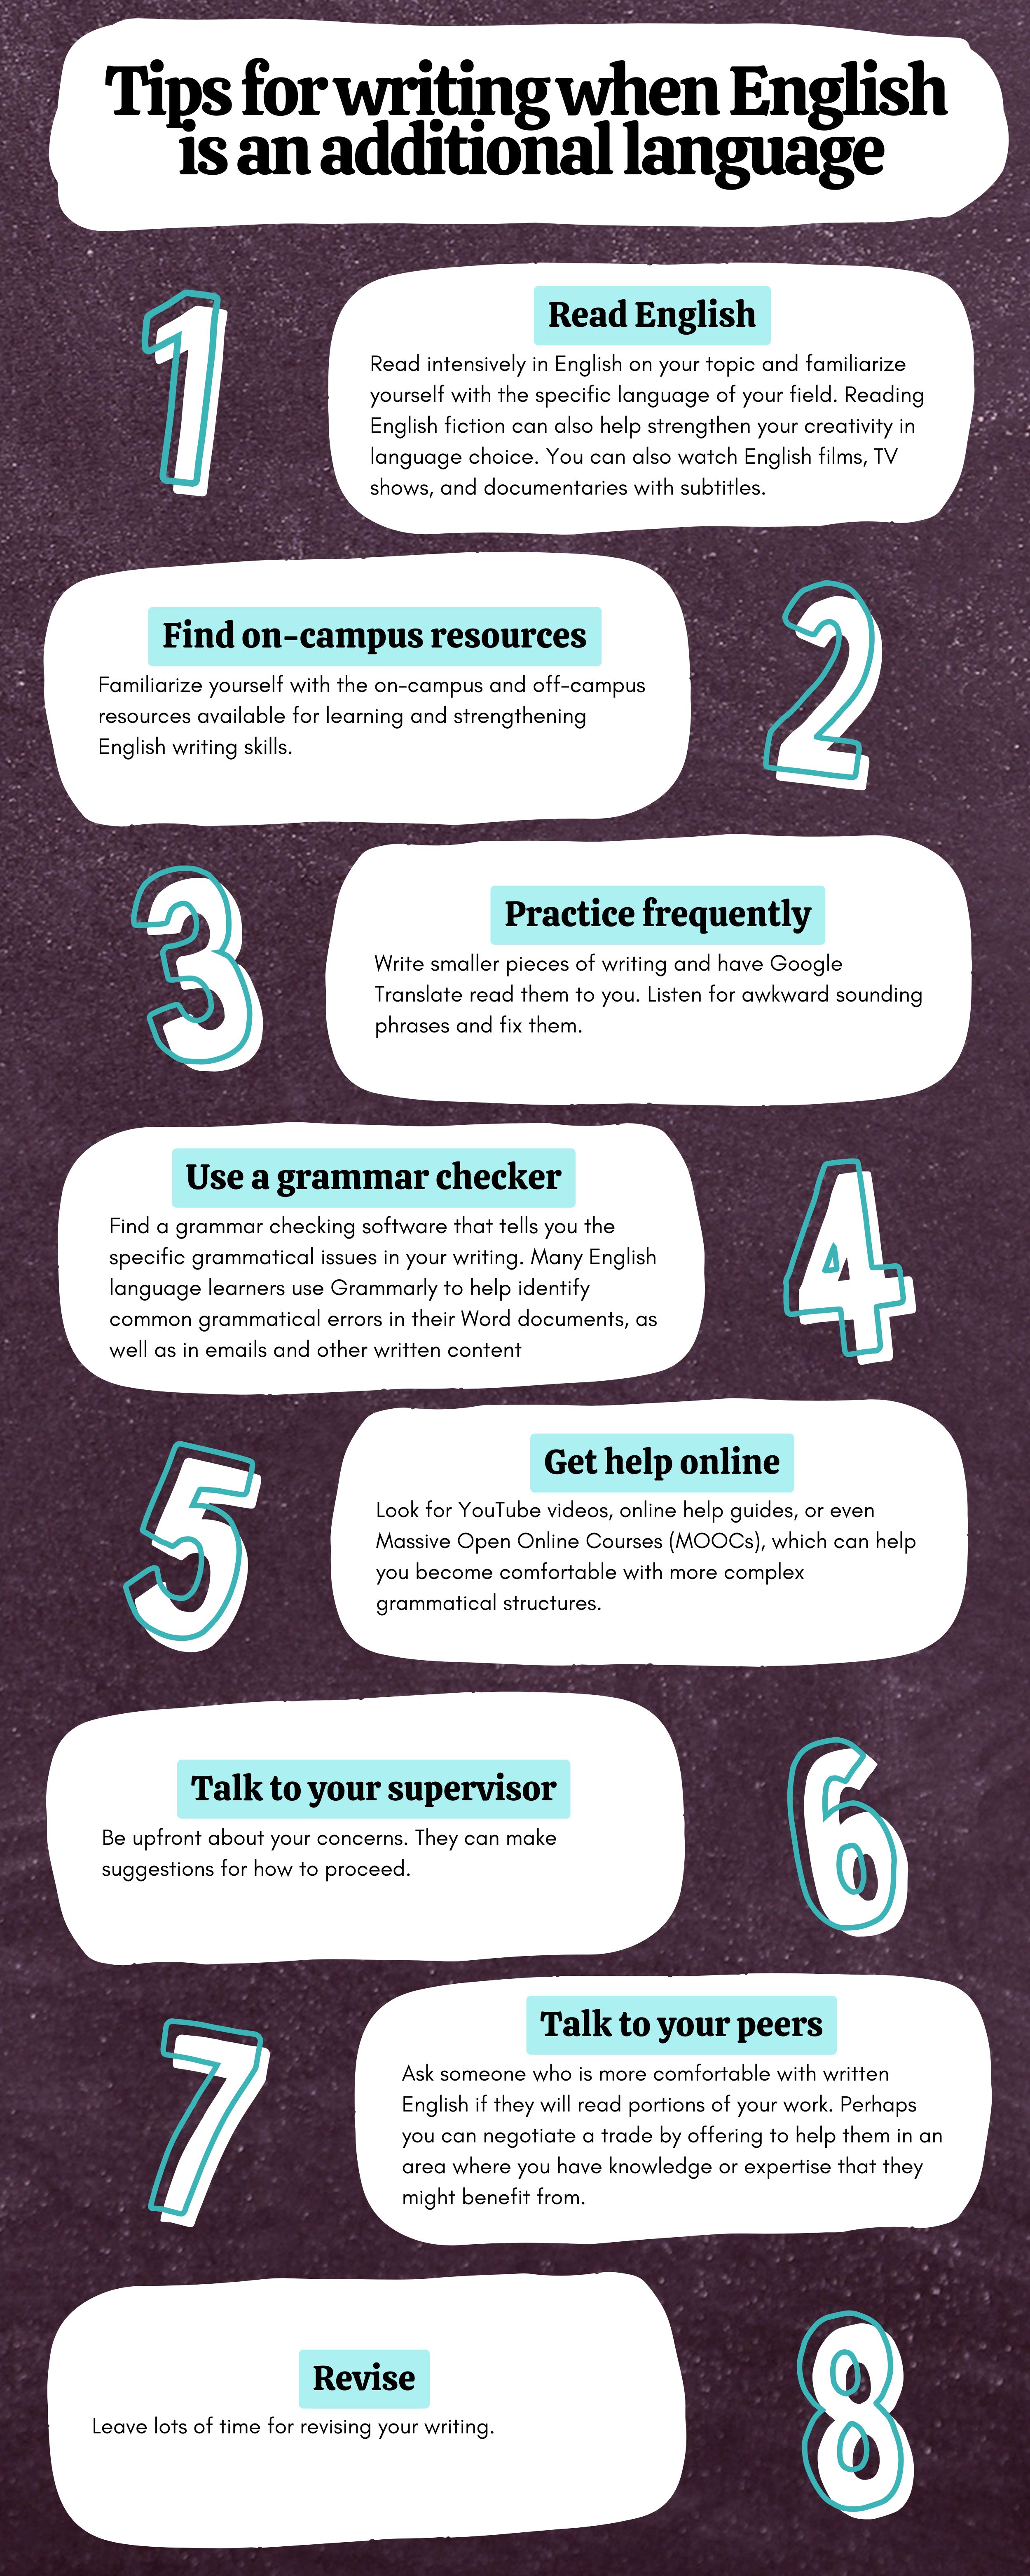 Poster highlighting eight suggestions for writing when English is an additional language with text description below.